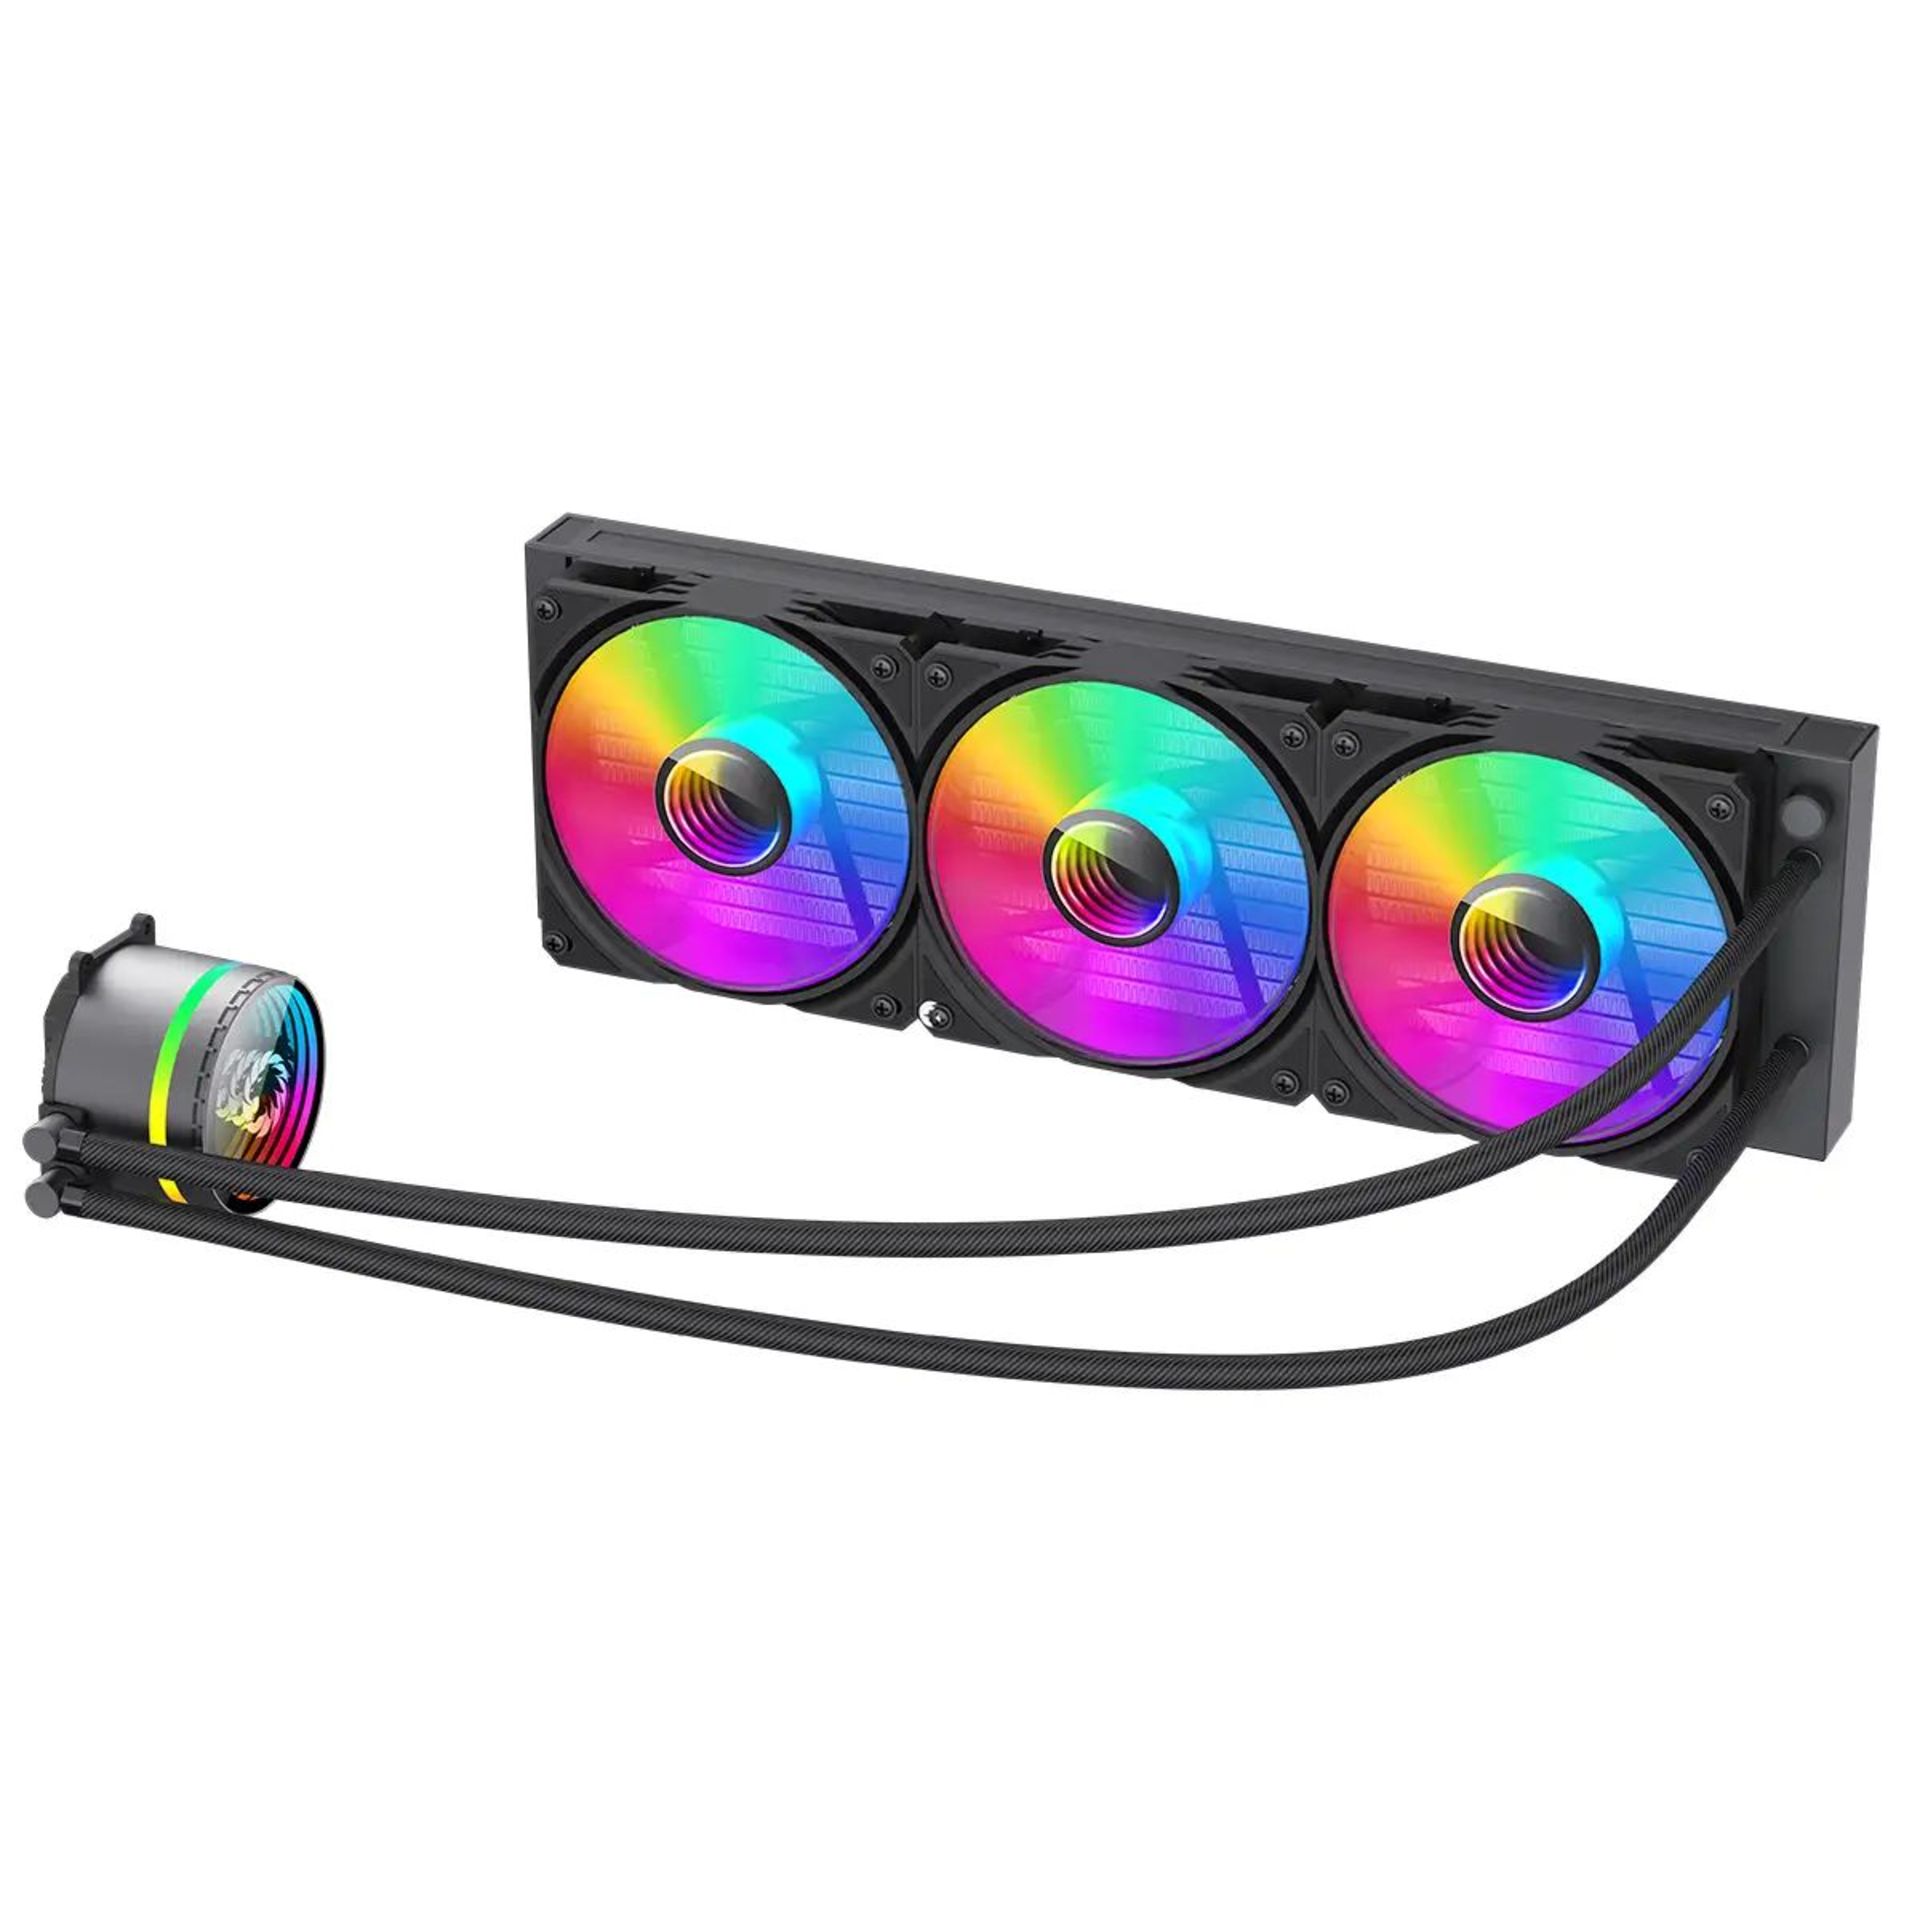 BRAND NEW FACTORY SEALED GAMEMAX Iceburg 360mm ARGB All-in-One Liquid Cooler. RRP £79.99. GameMax - Image 2 of 7